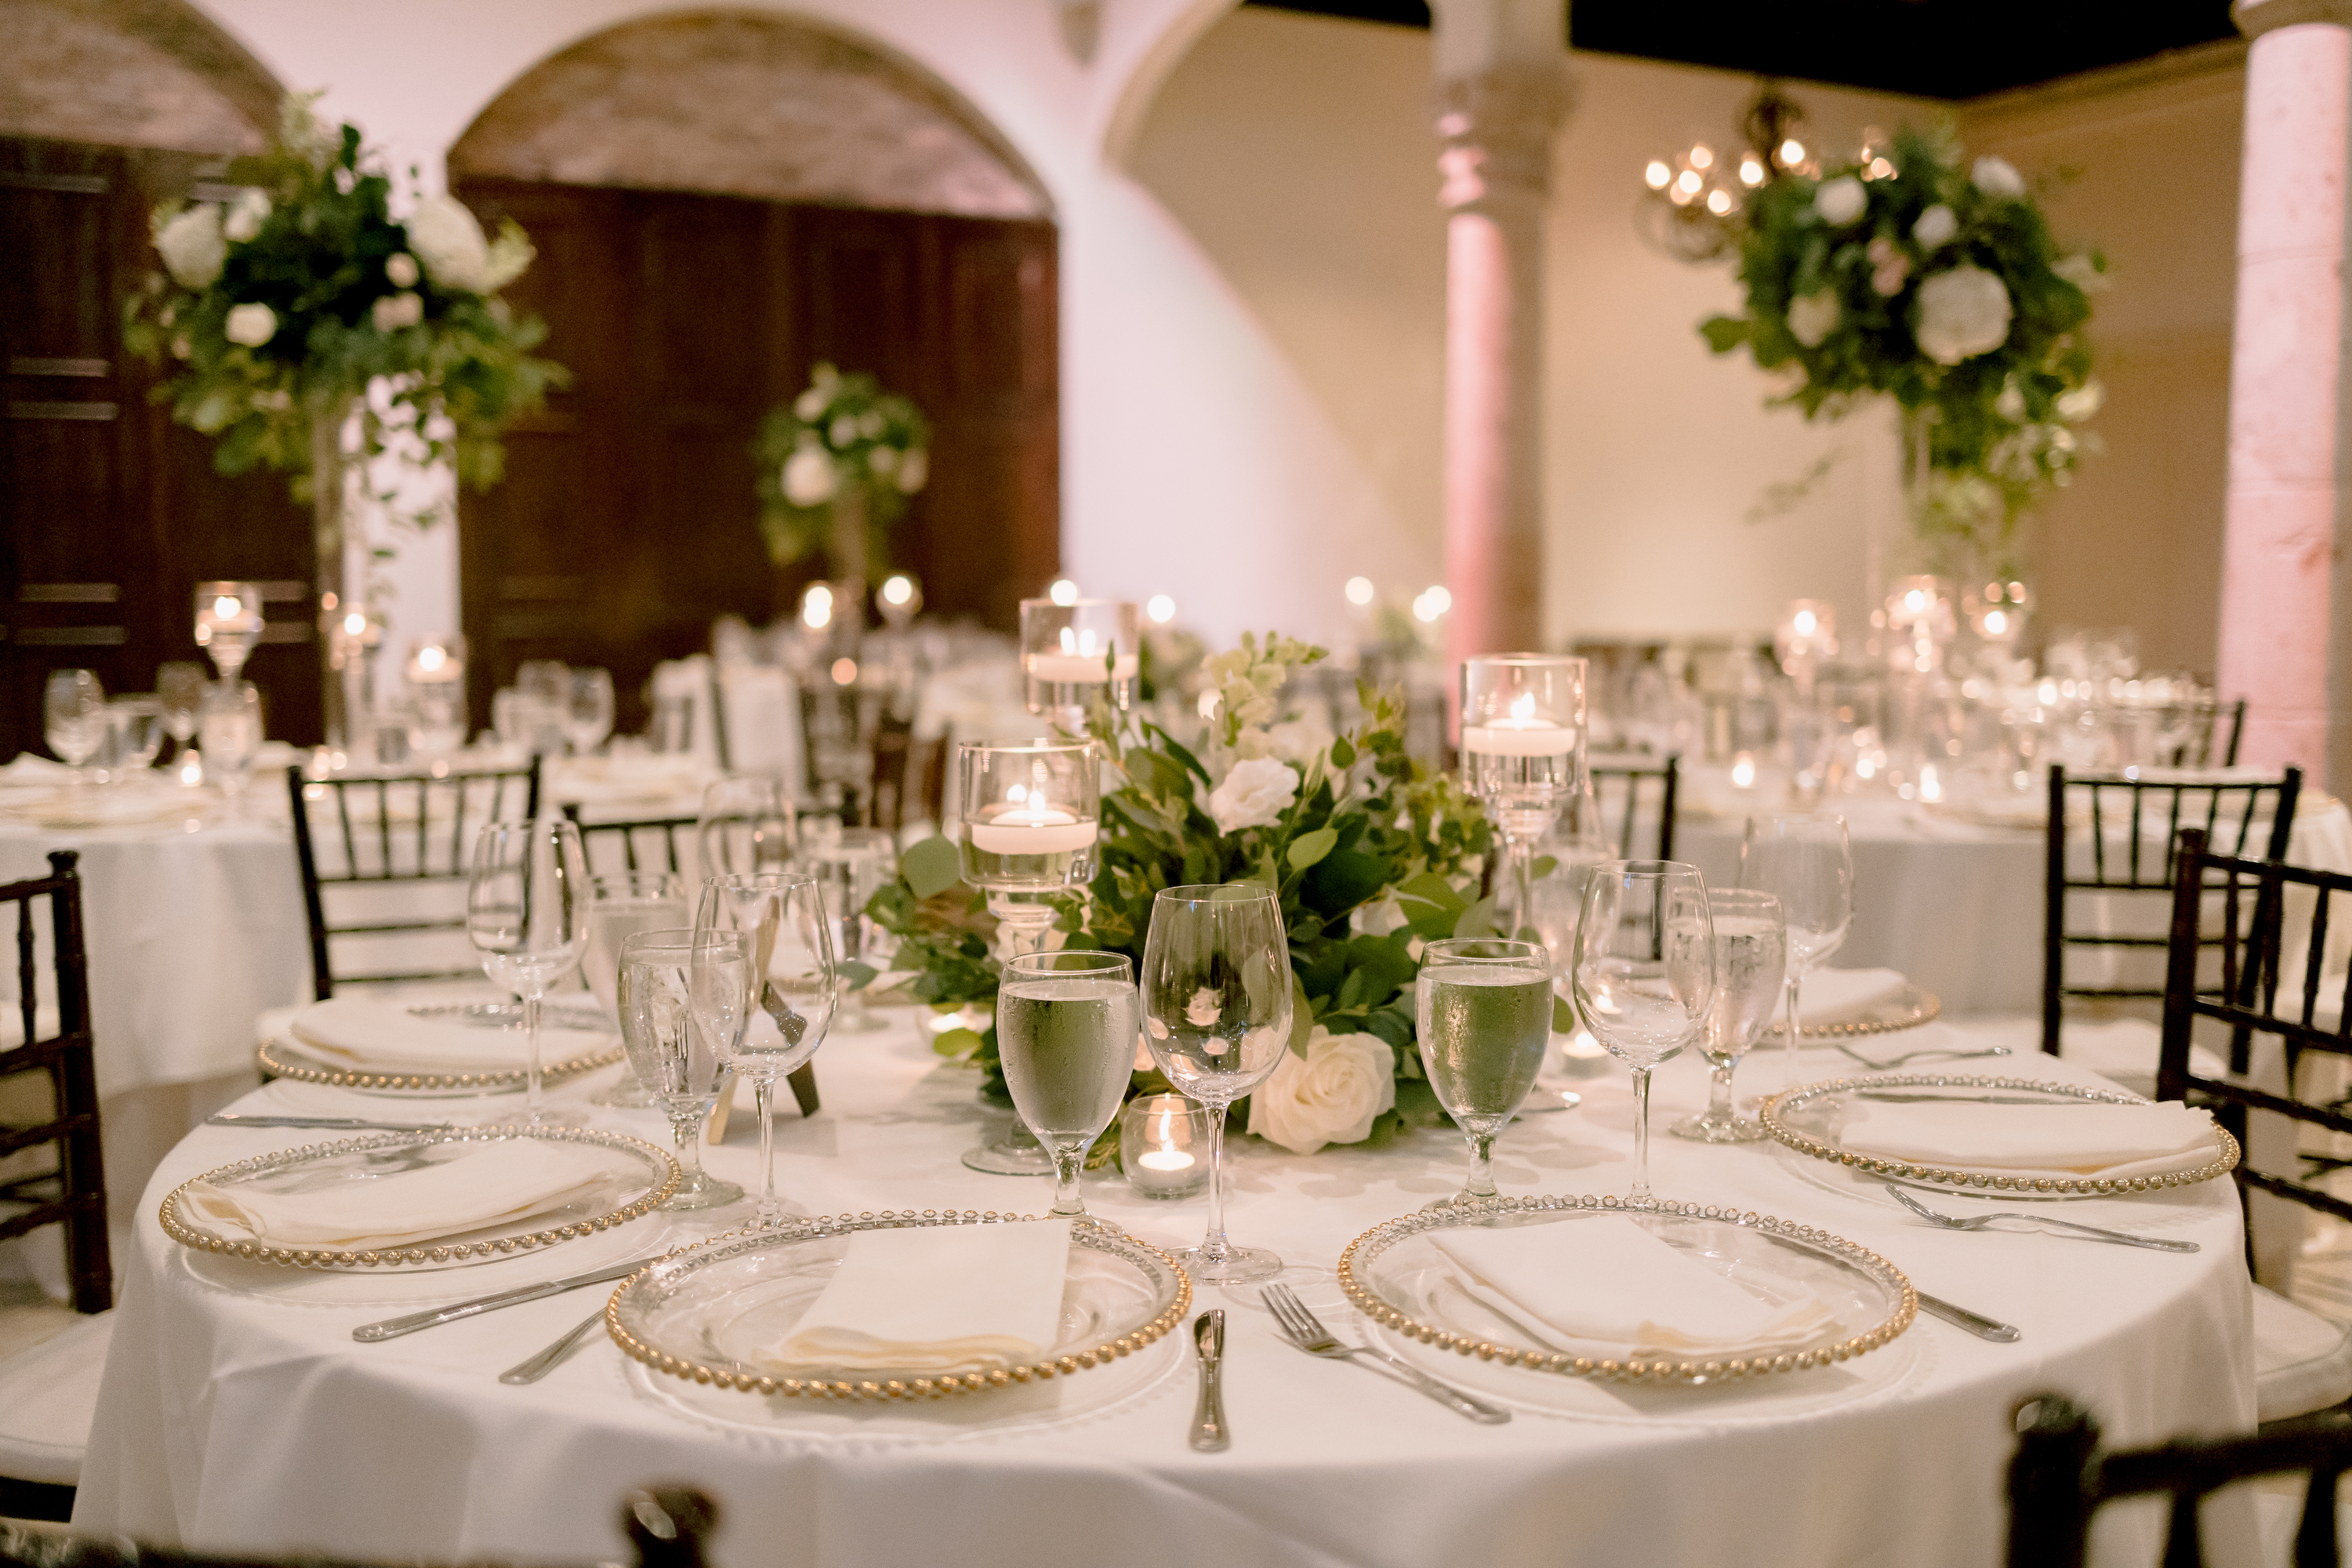 The reception tables have greenery centerpieces with white roses.